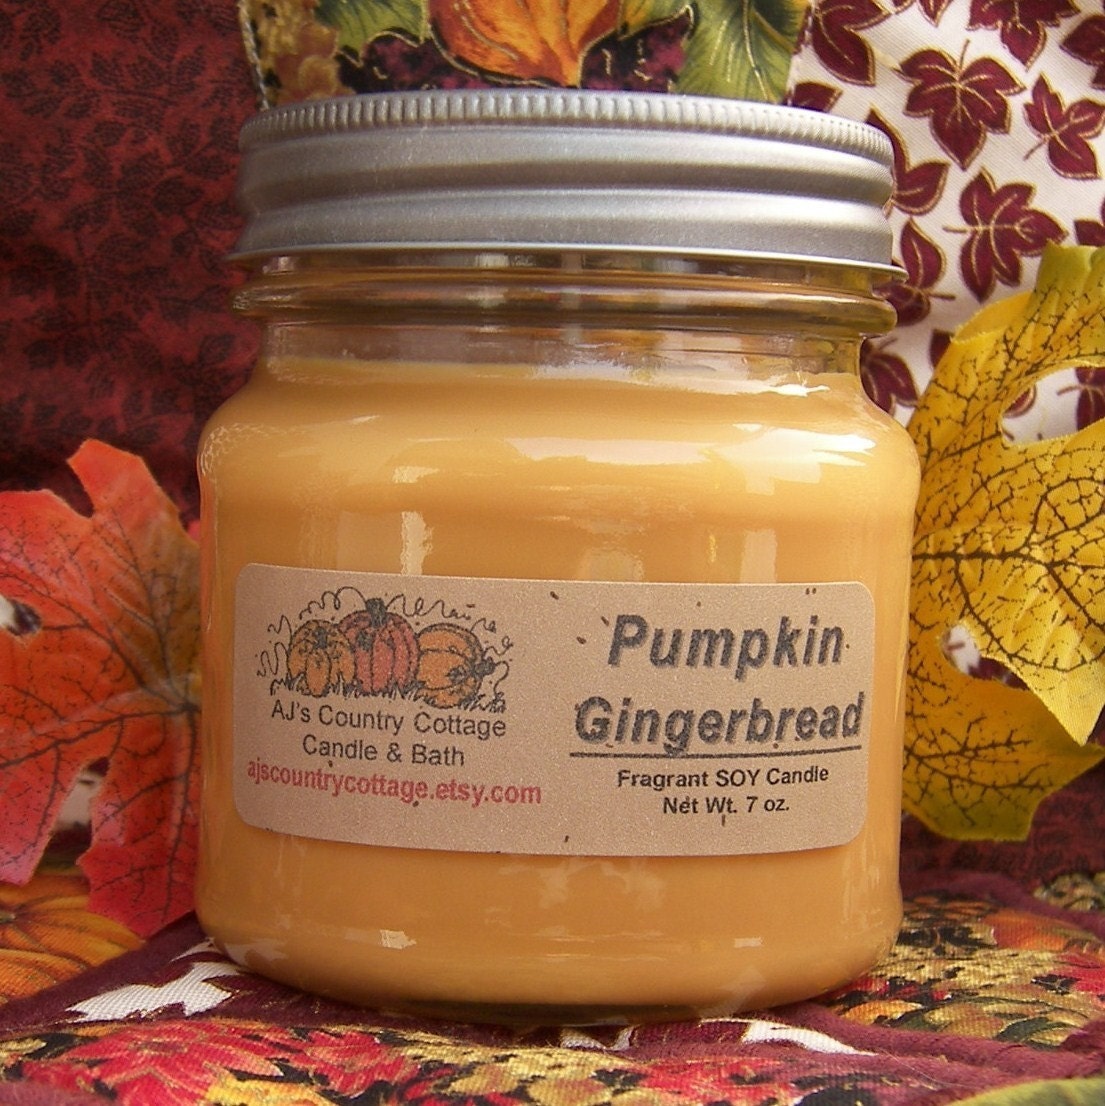 NEW PUMPKIN GINGERBREAD SOY CANDLE - HIGHLY SCENTED - VEGAN